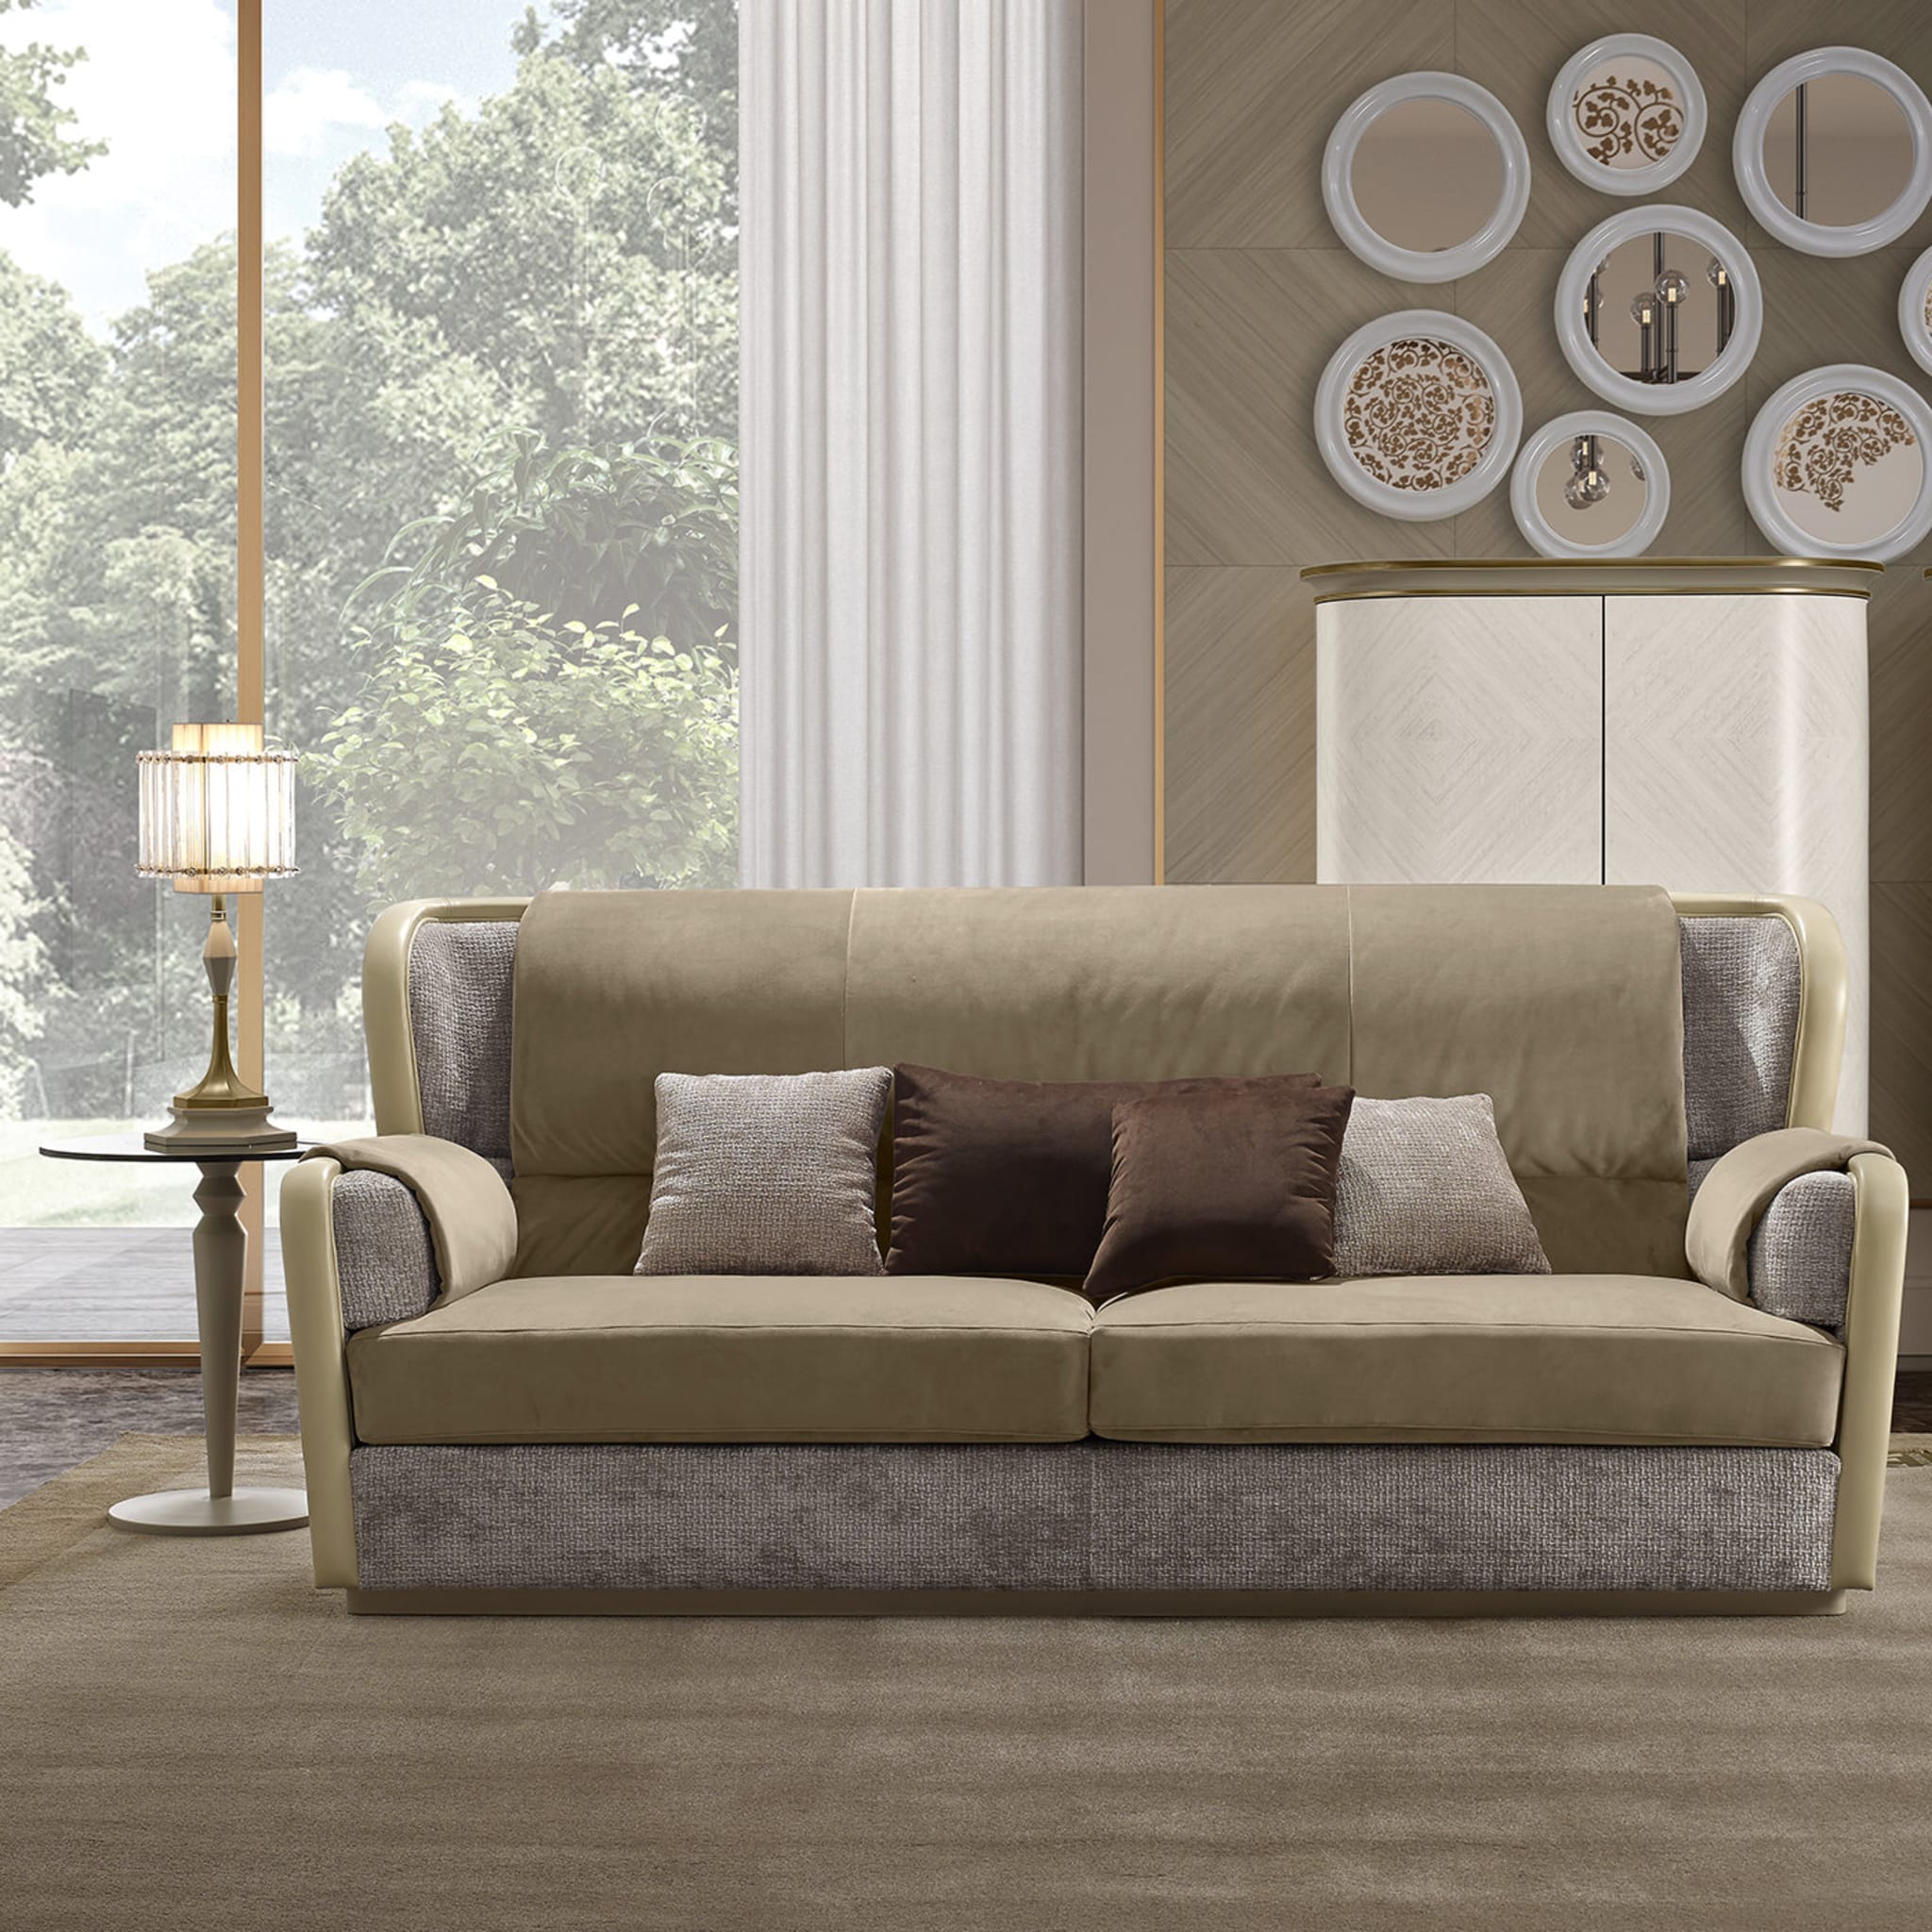 Beige Leather and Velvet 3-Seater Sofa - Alternative view 1